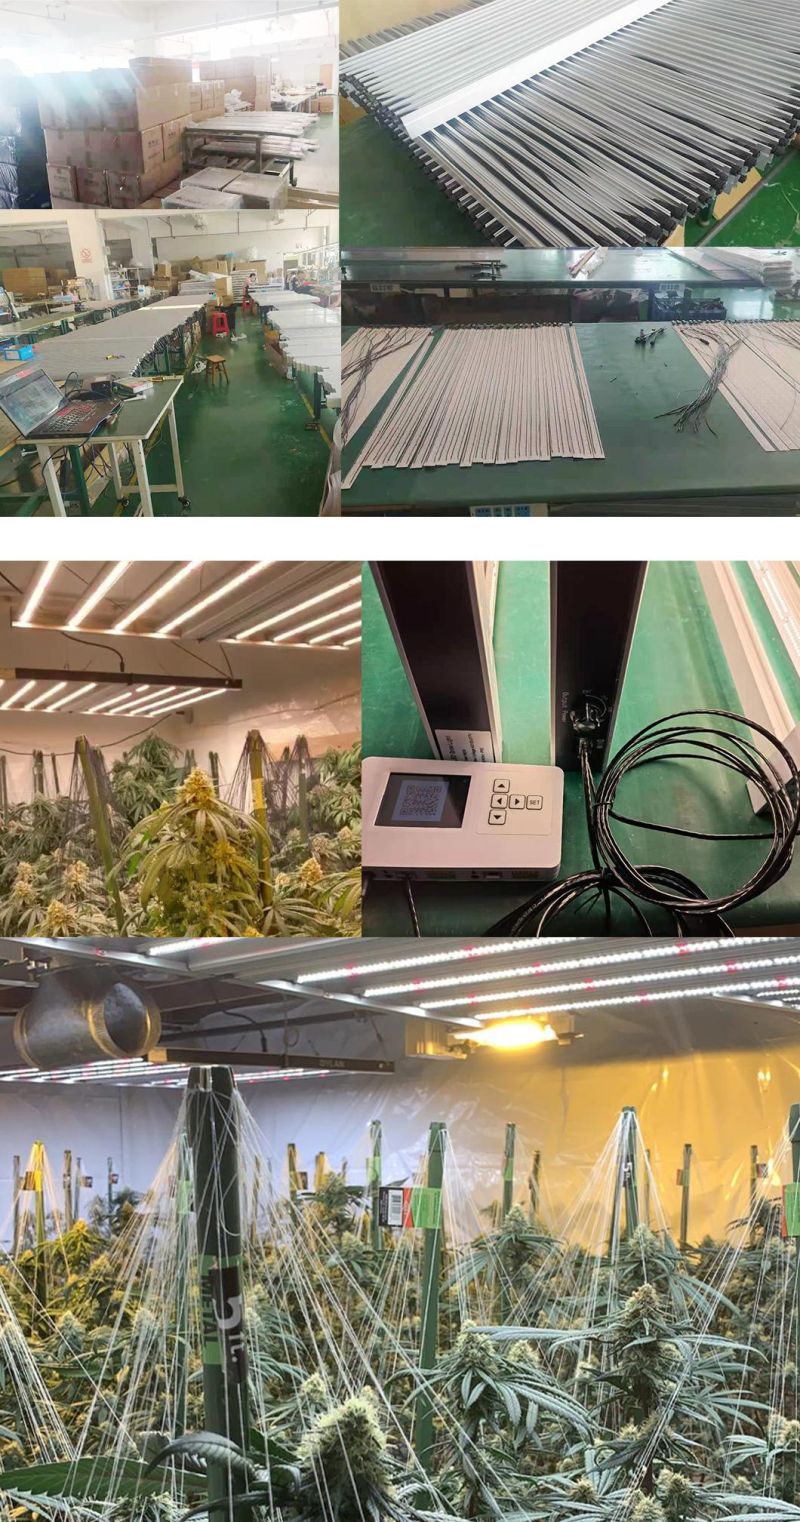 960W Full Spectrum LED Grow Light for Plants Growing All Stages